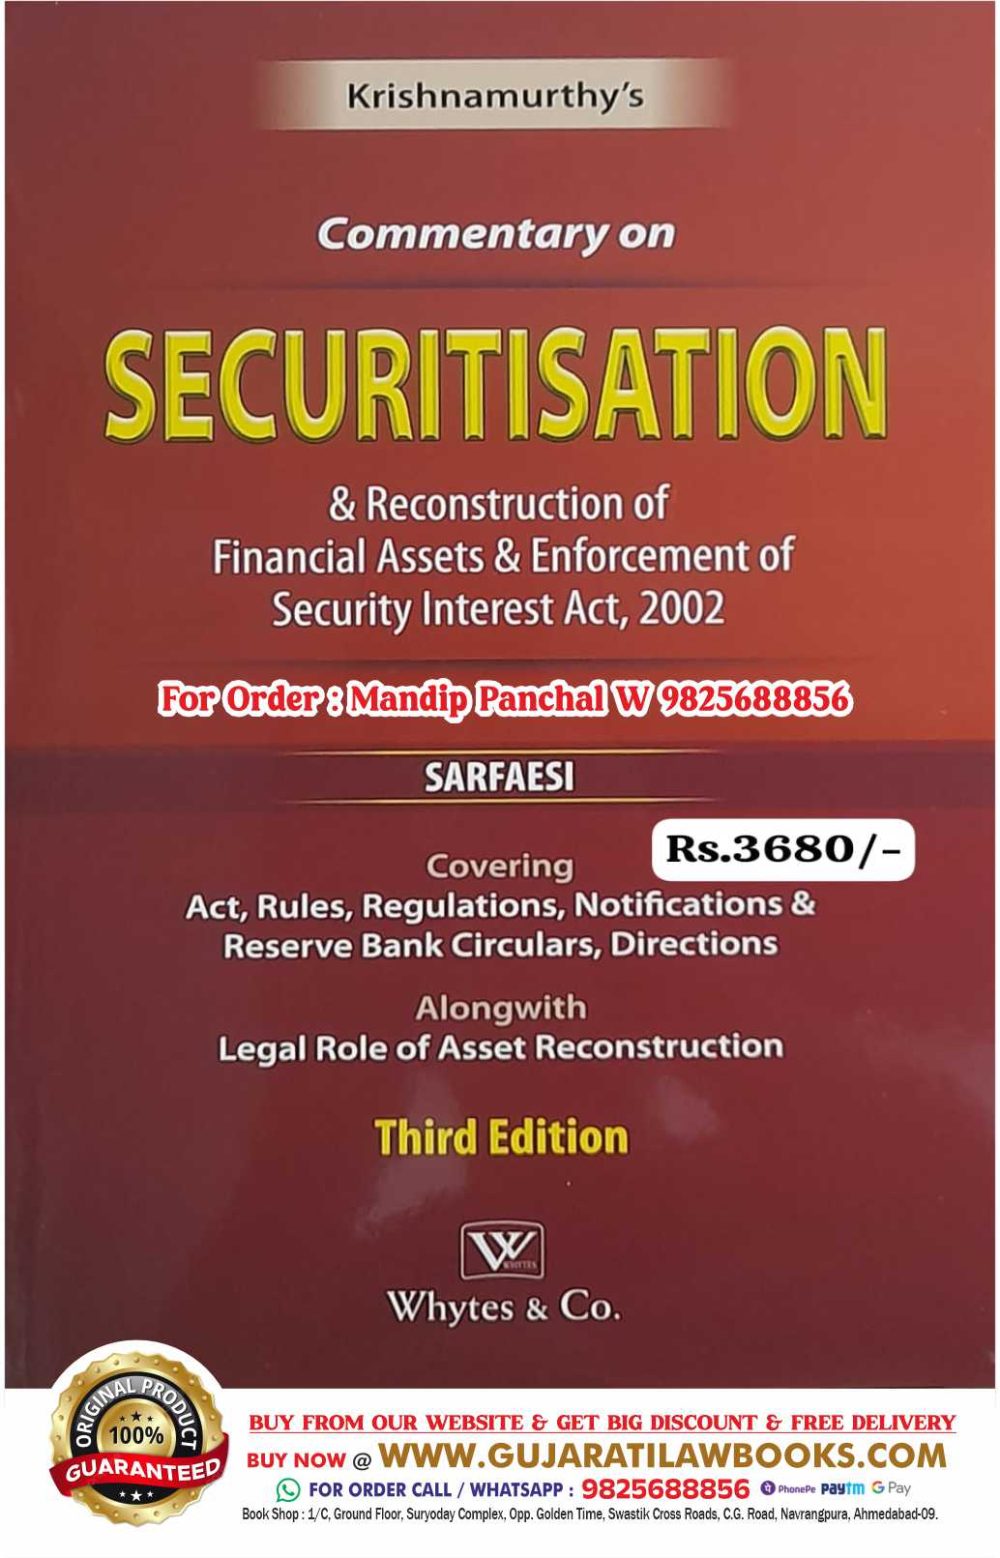 Krishnamurthy's COMMENTARY ON SECURITISATION & Reconstruction of Financial Assets and Enforcement of Security Interest Act, 2002 SARFAESI - Latest 3rd Edition March 2024 Whytes & Co